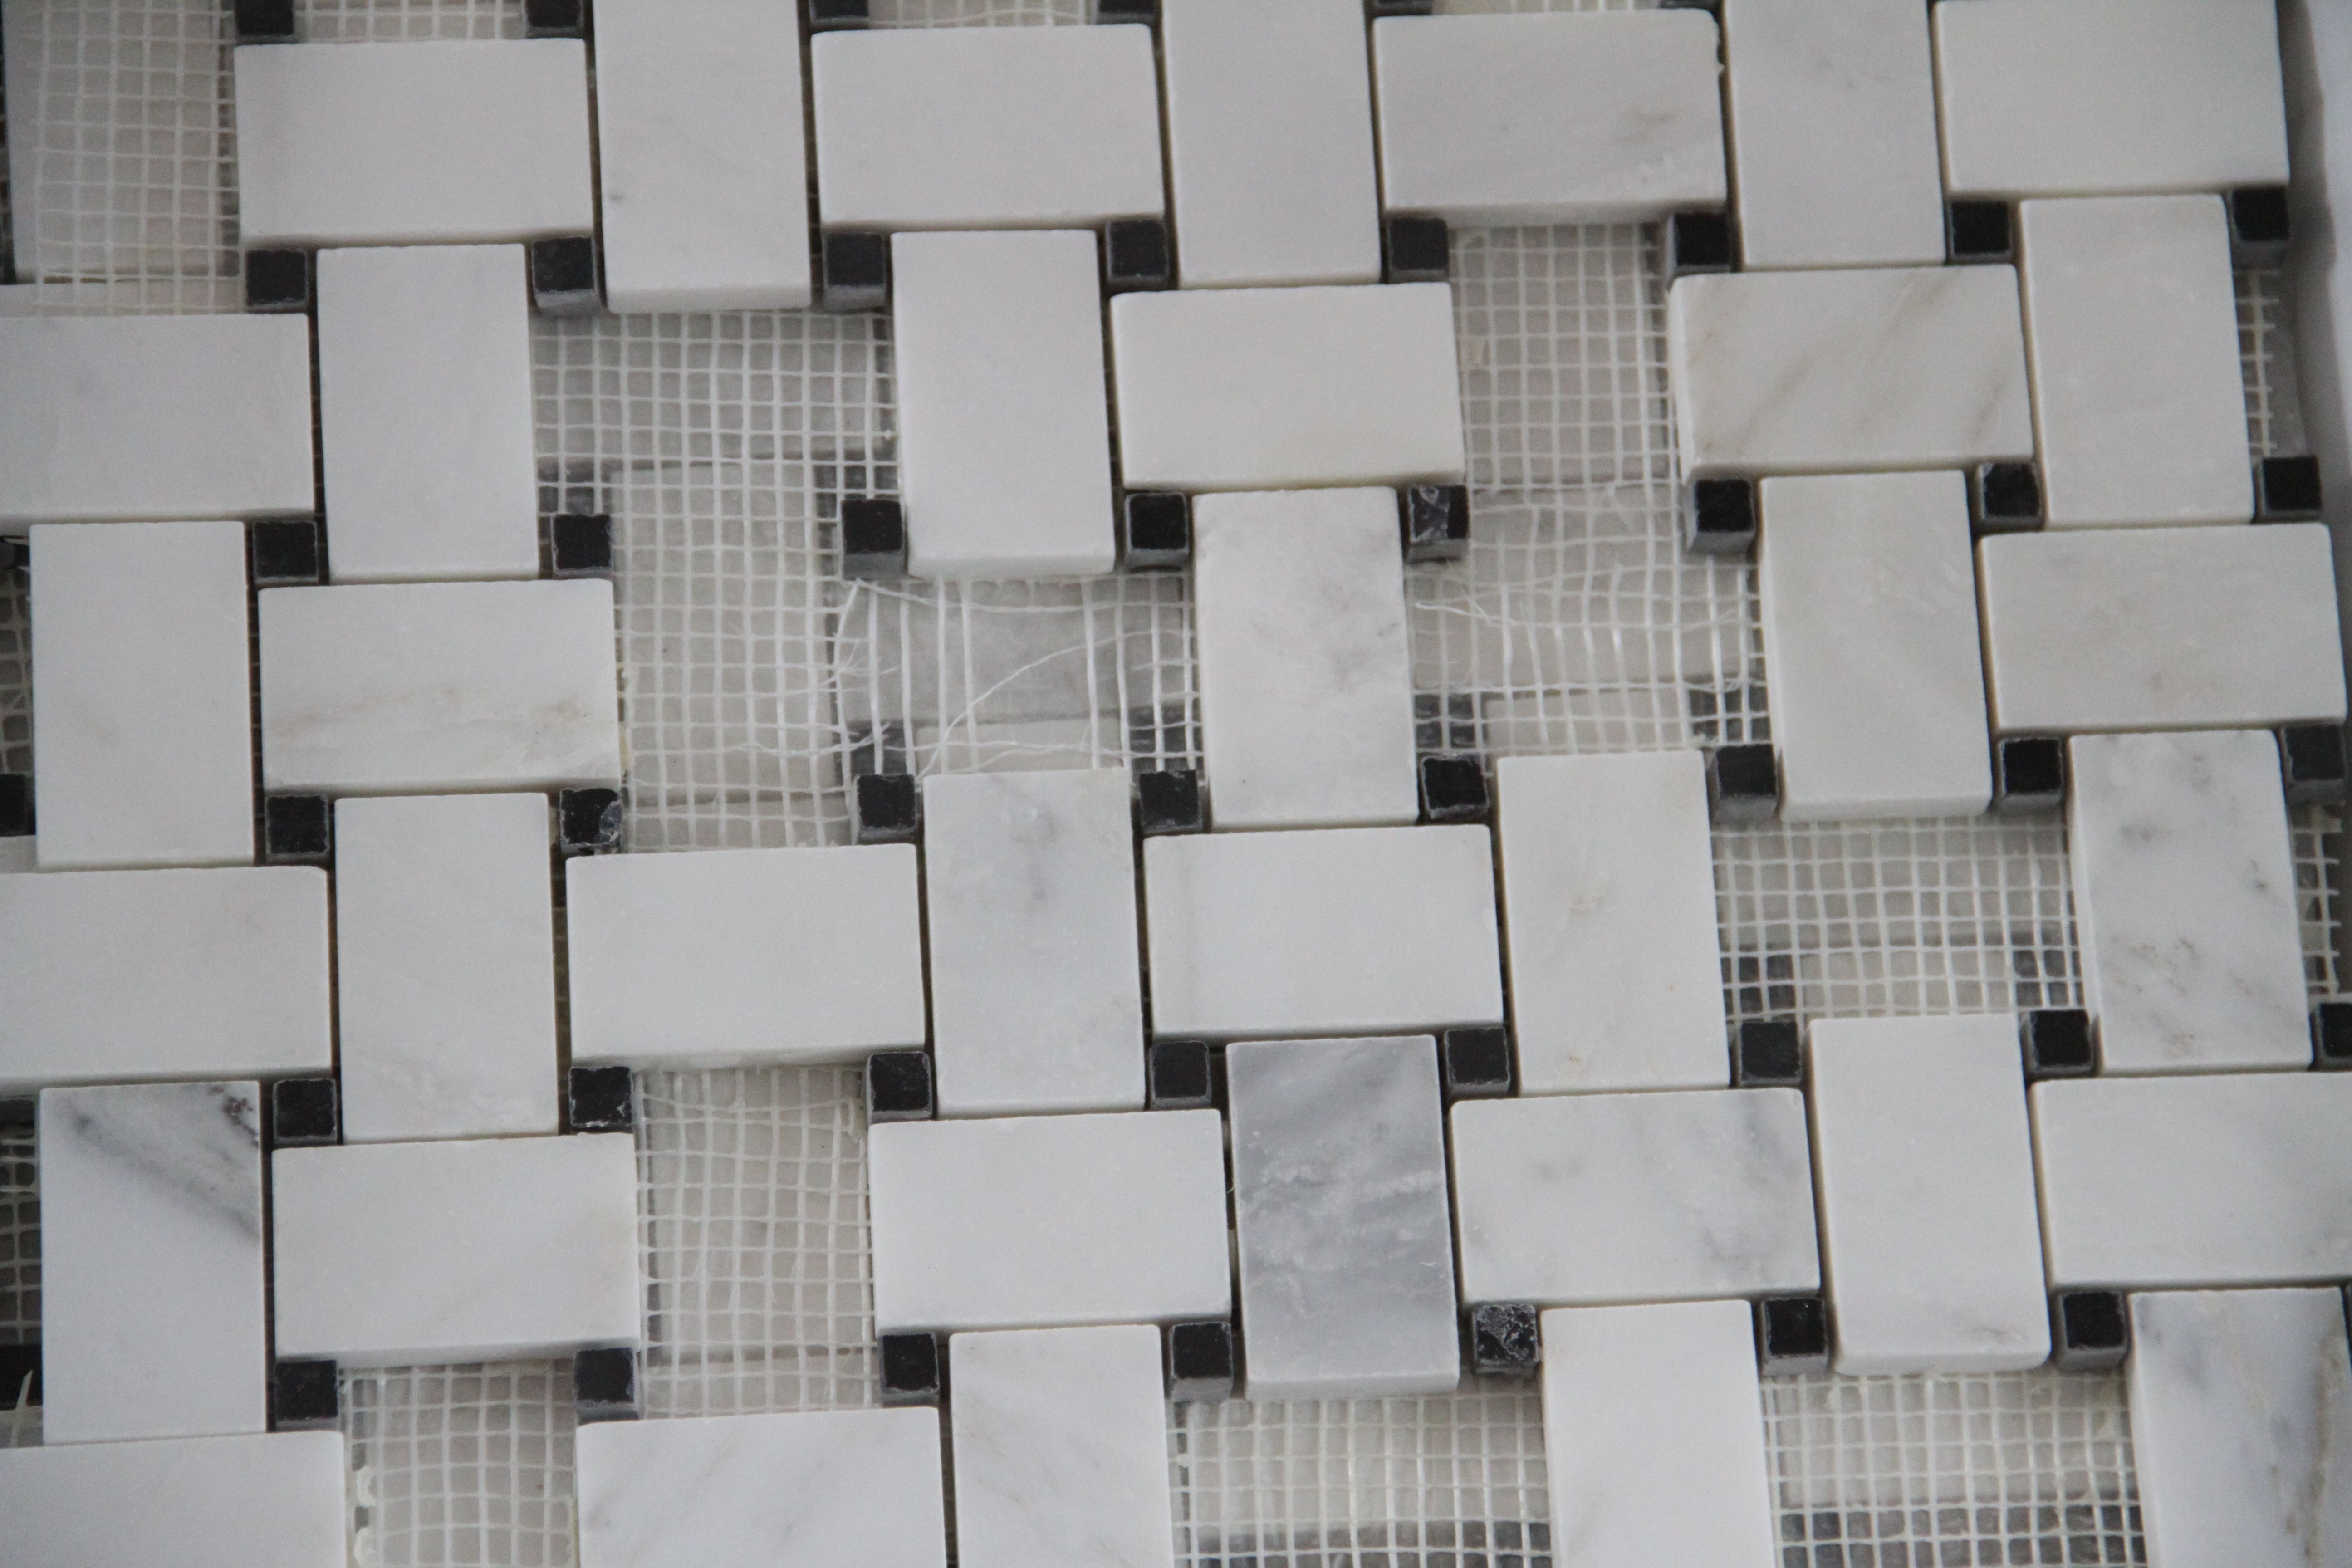 I hand selected tiles from the OTHER mosaic to create little squares. J.J. simply trimmed each one individually.